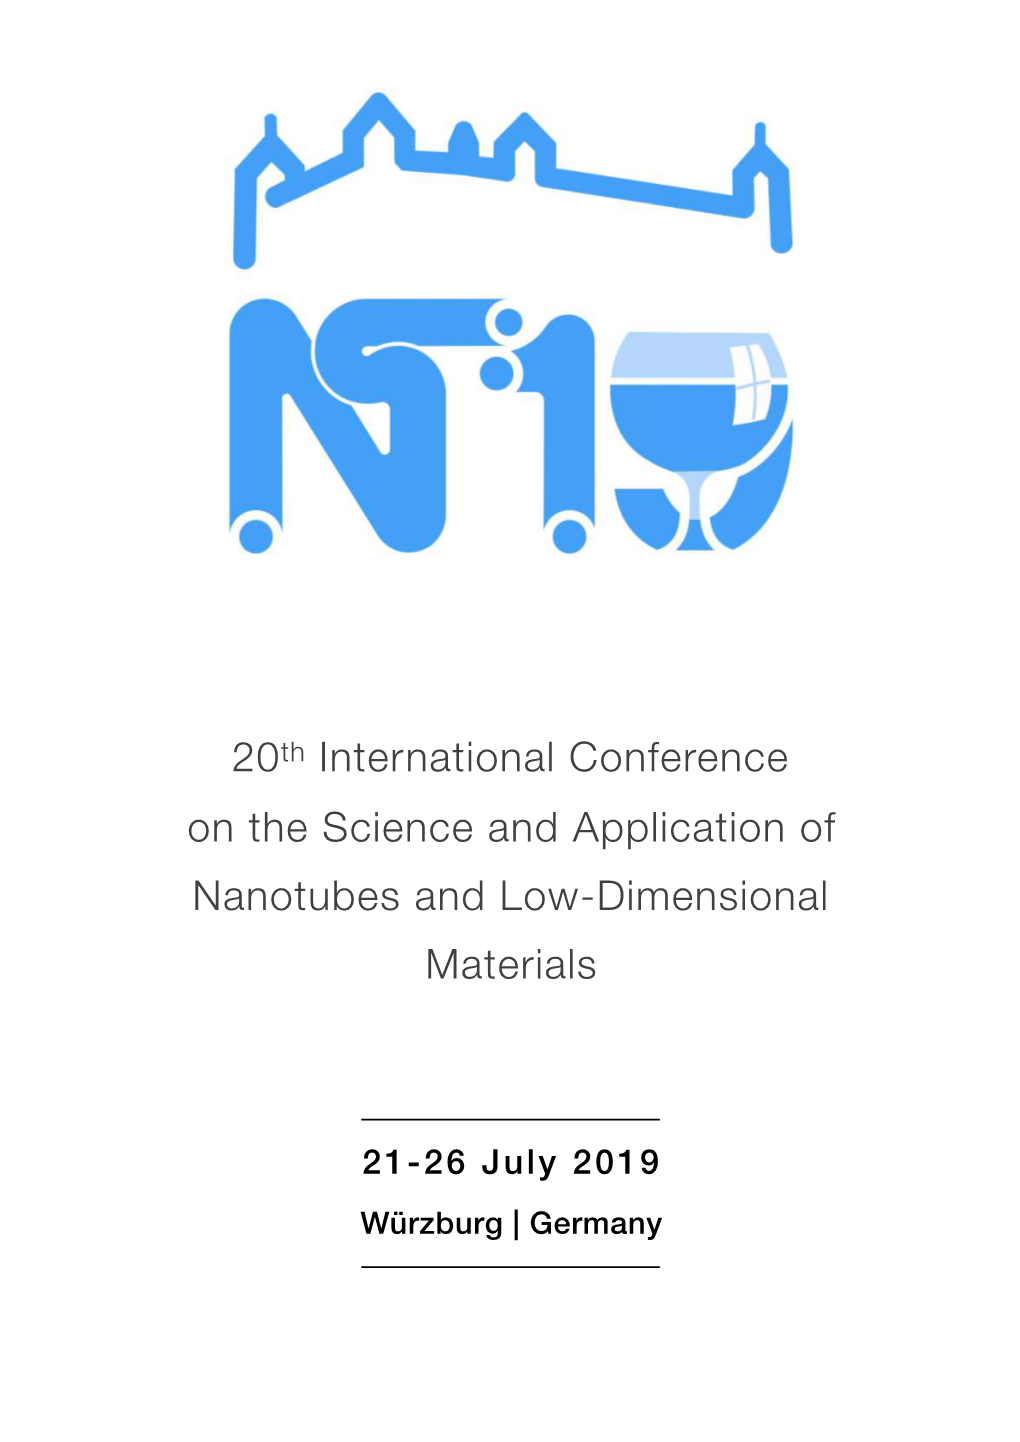 20Th International Conference on the Science and Application of Nanotubes and Low-Dimensional Materials